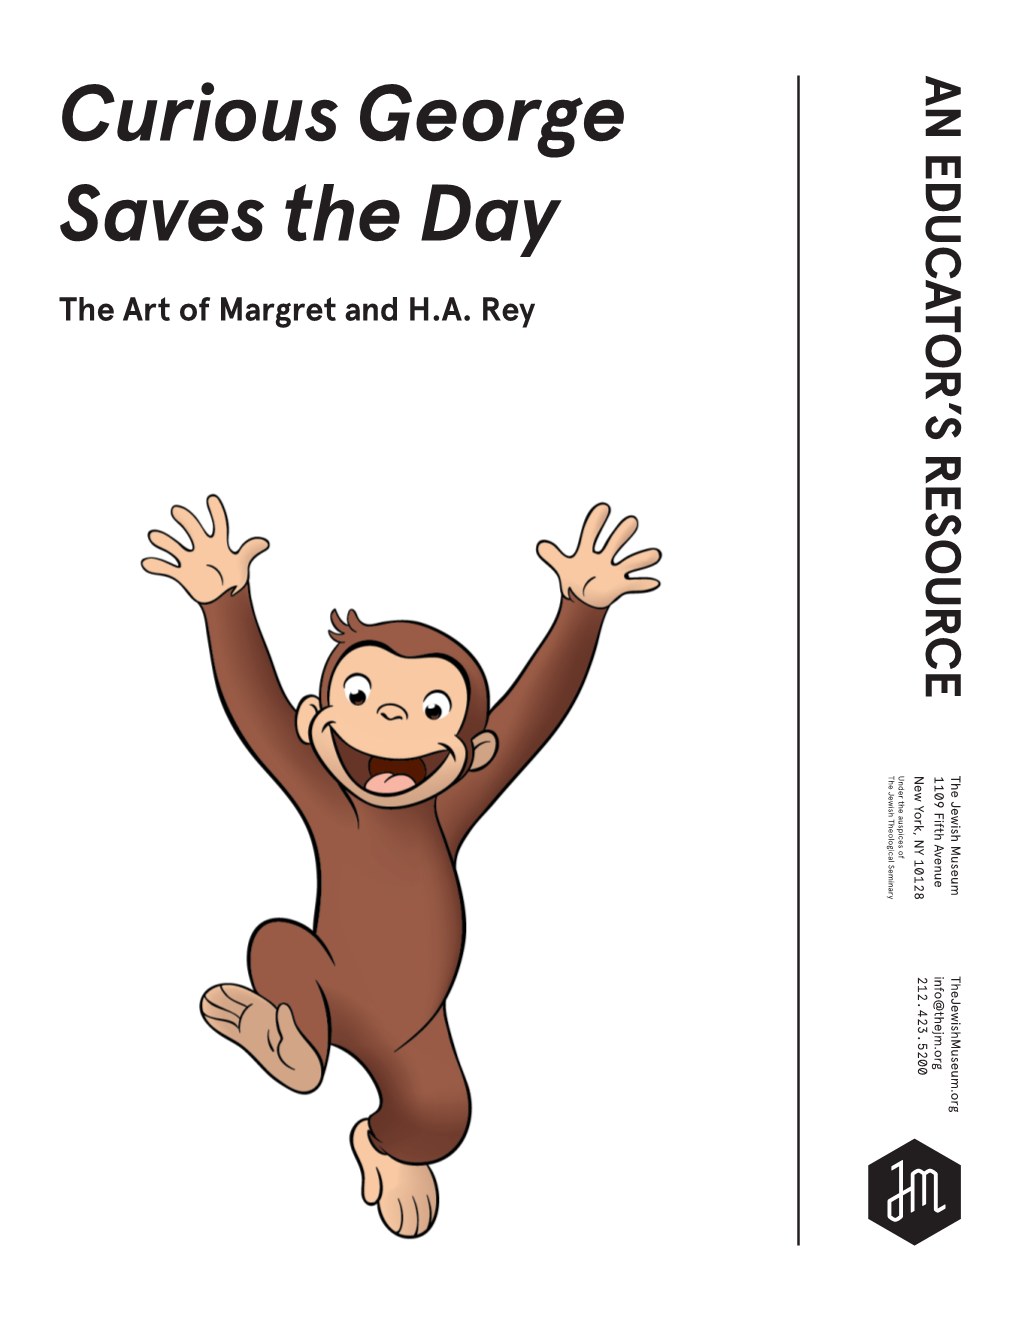 Curious George Saves the Day the Art of Margret and H.A